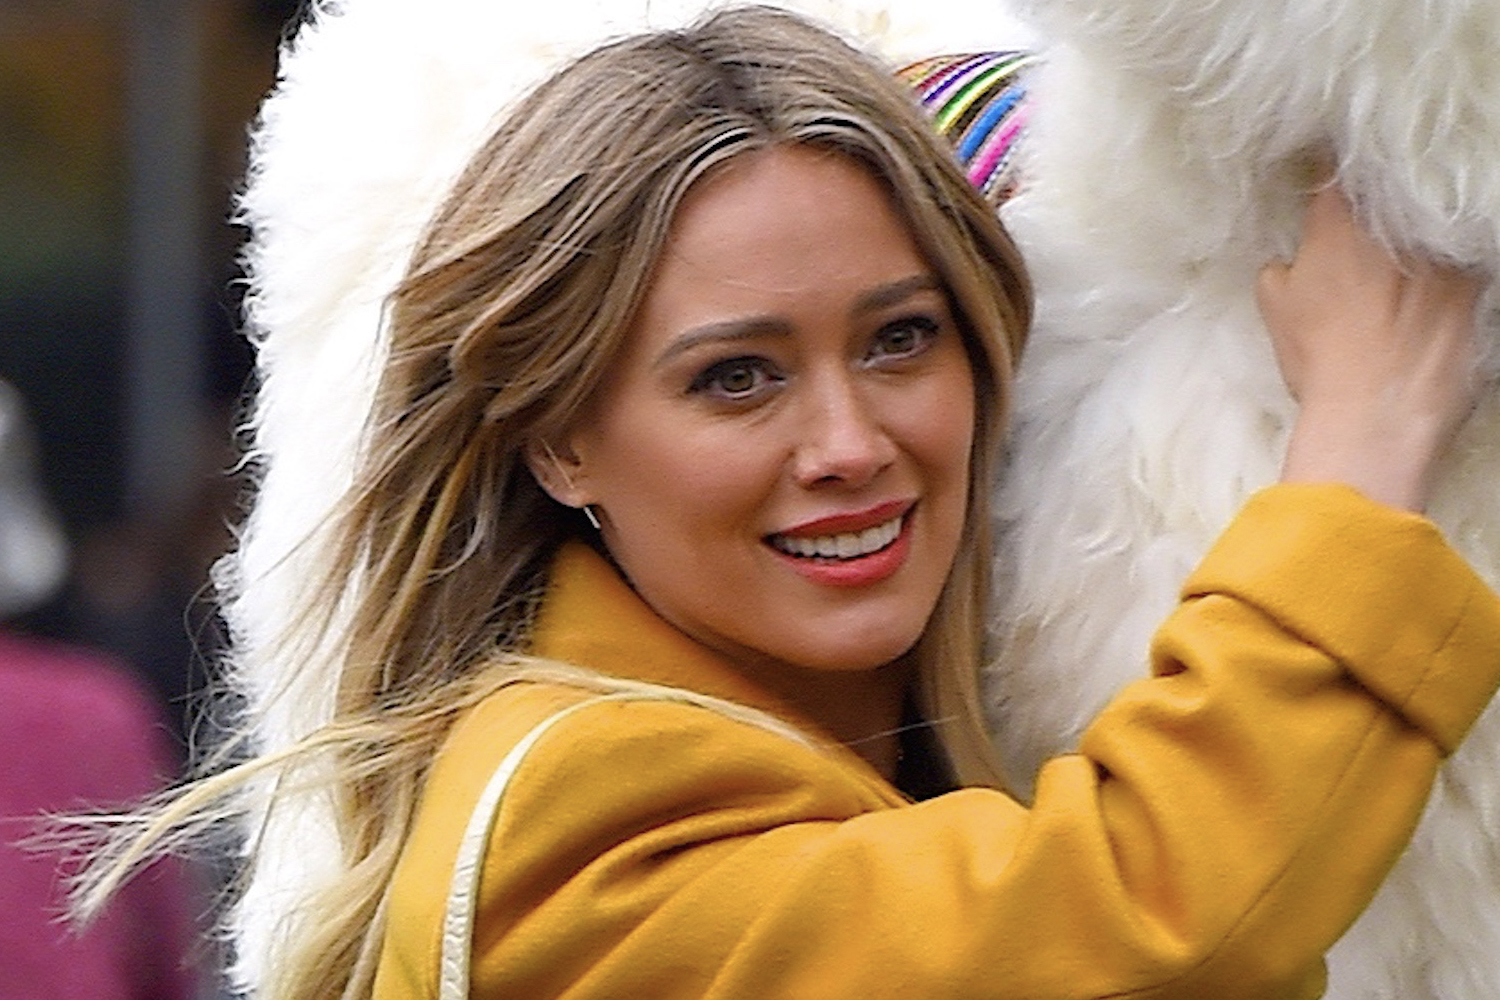 Hilary Duff carrying a llama while shooting an episode of the Lizzie McGuire reboot in 2019